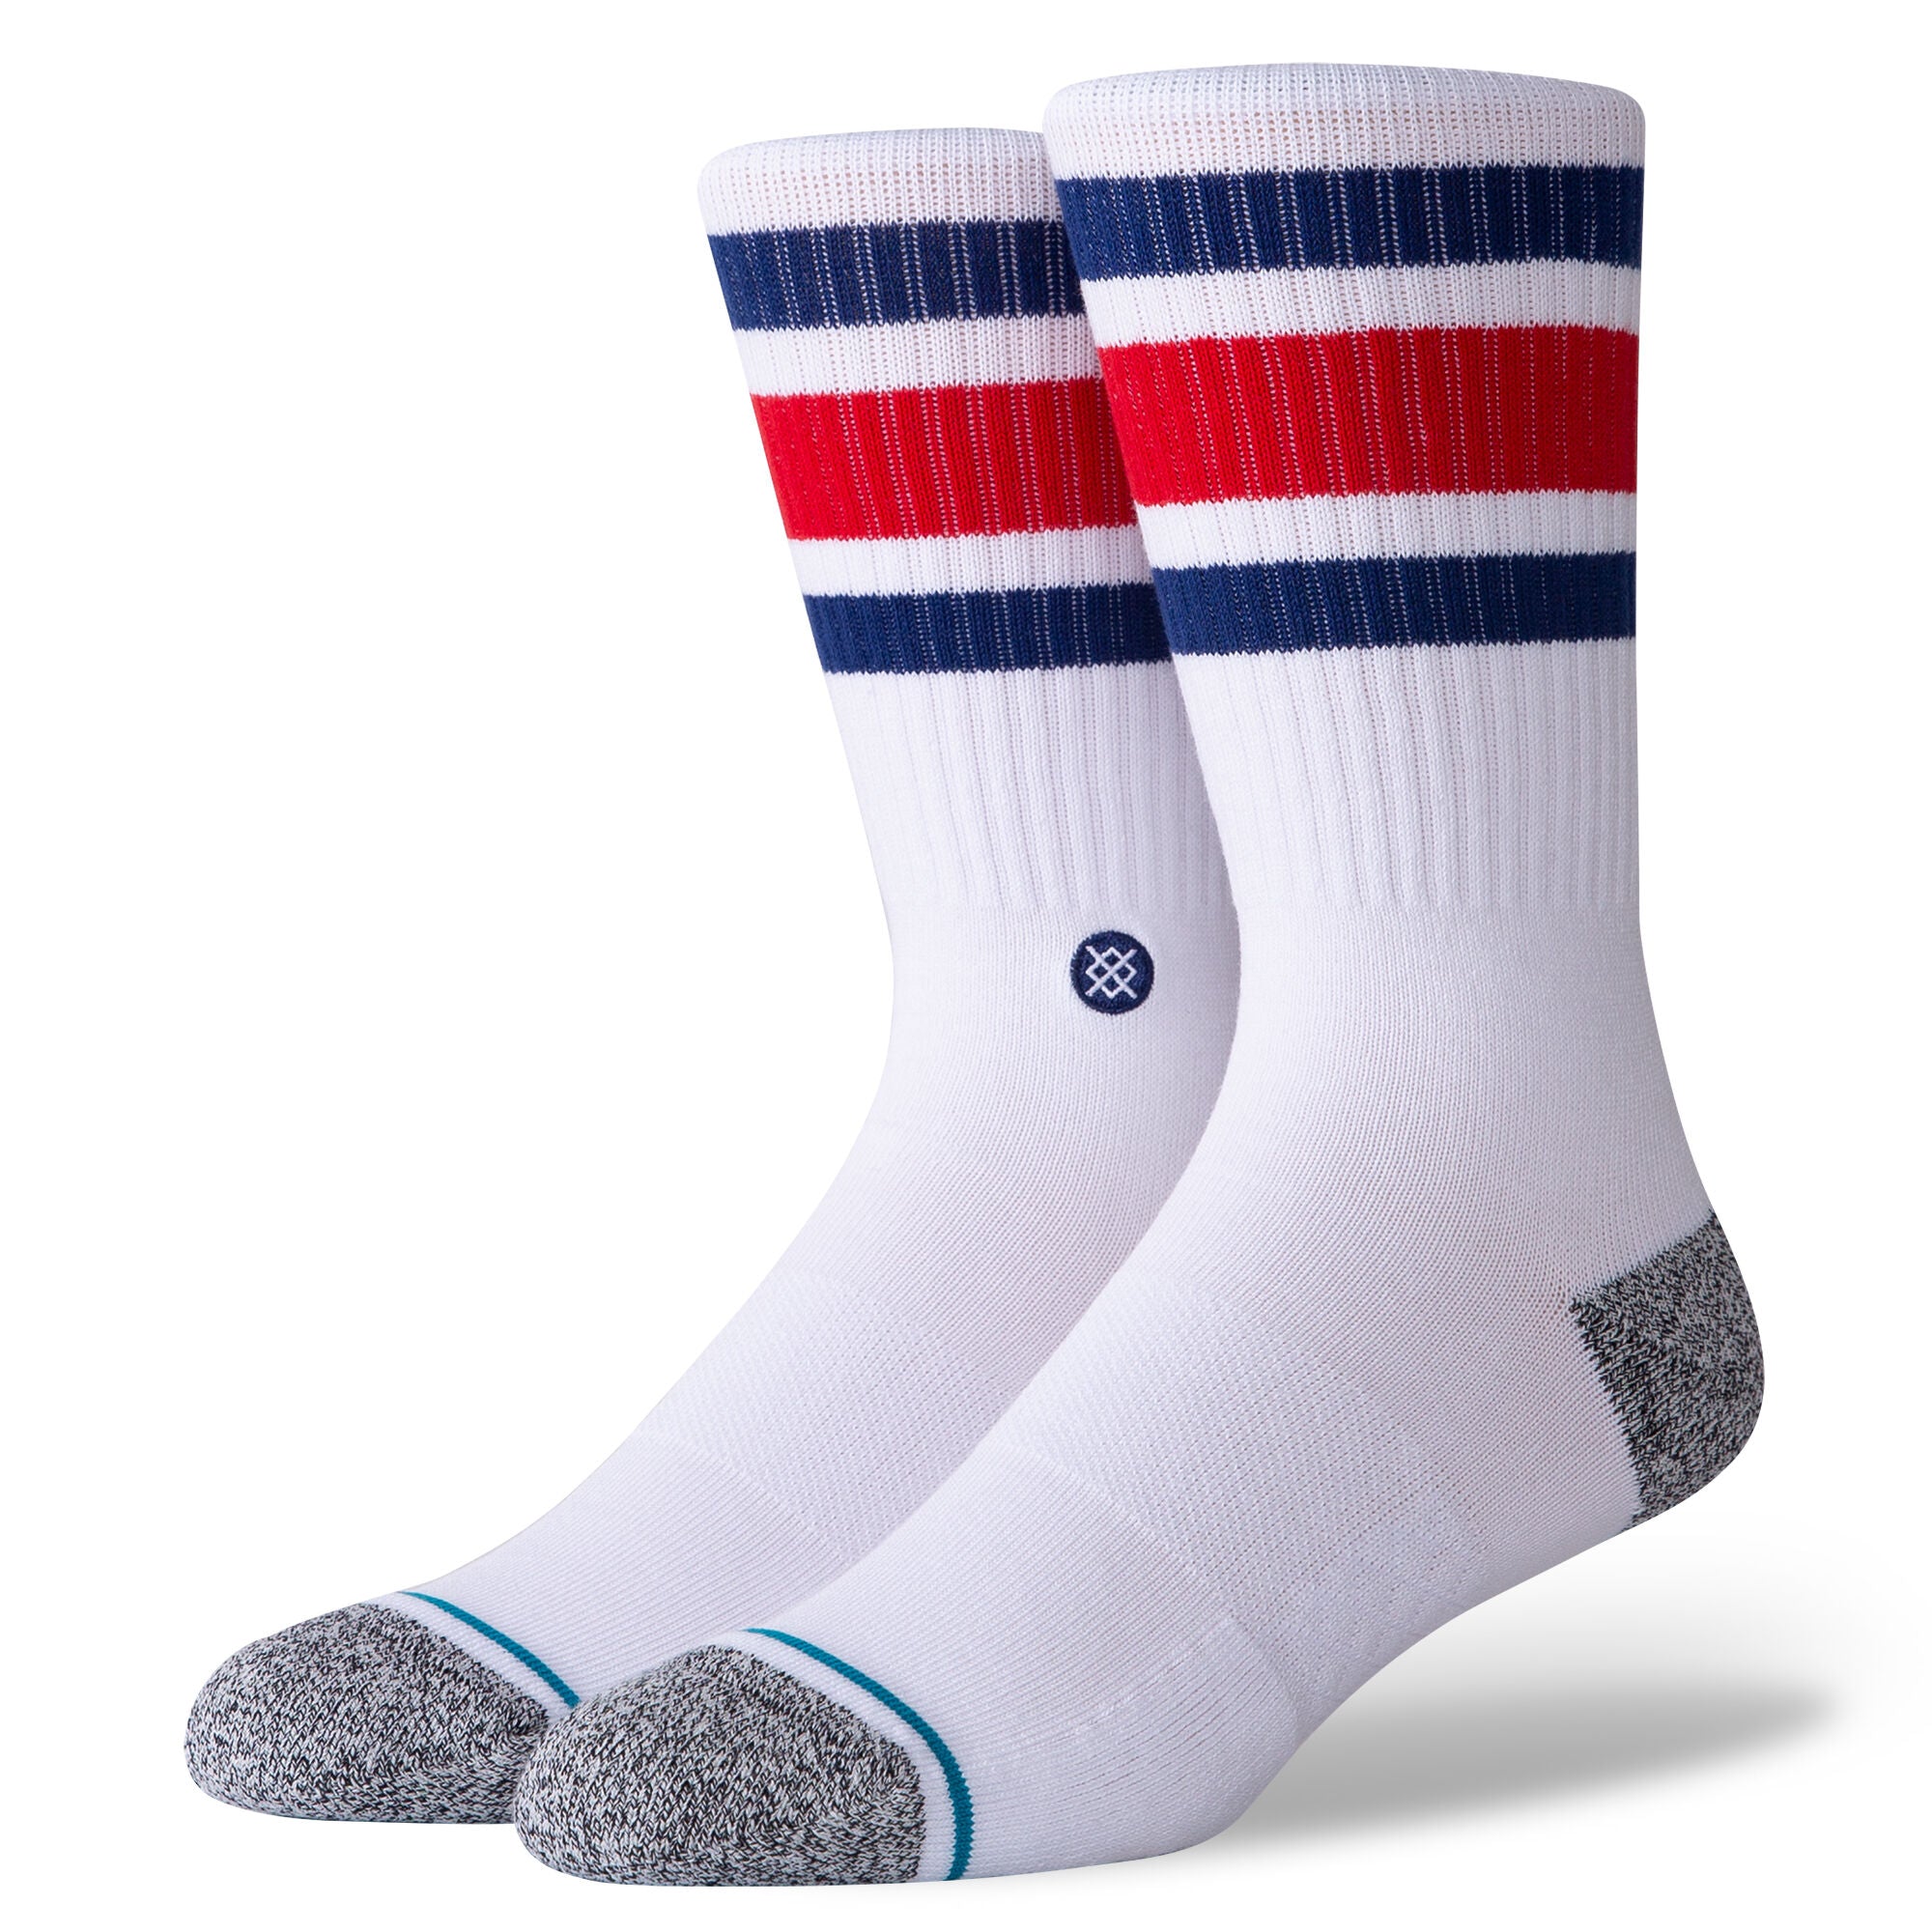 a white pair of crew length socks modeled on a foot form with a grey toe and heel and a blue, red, blue striped pattern near the cuff